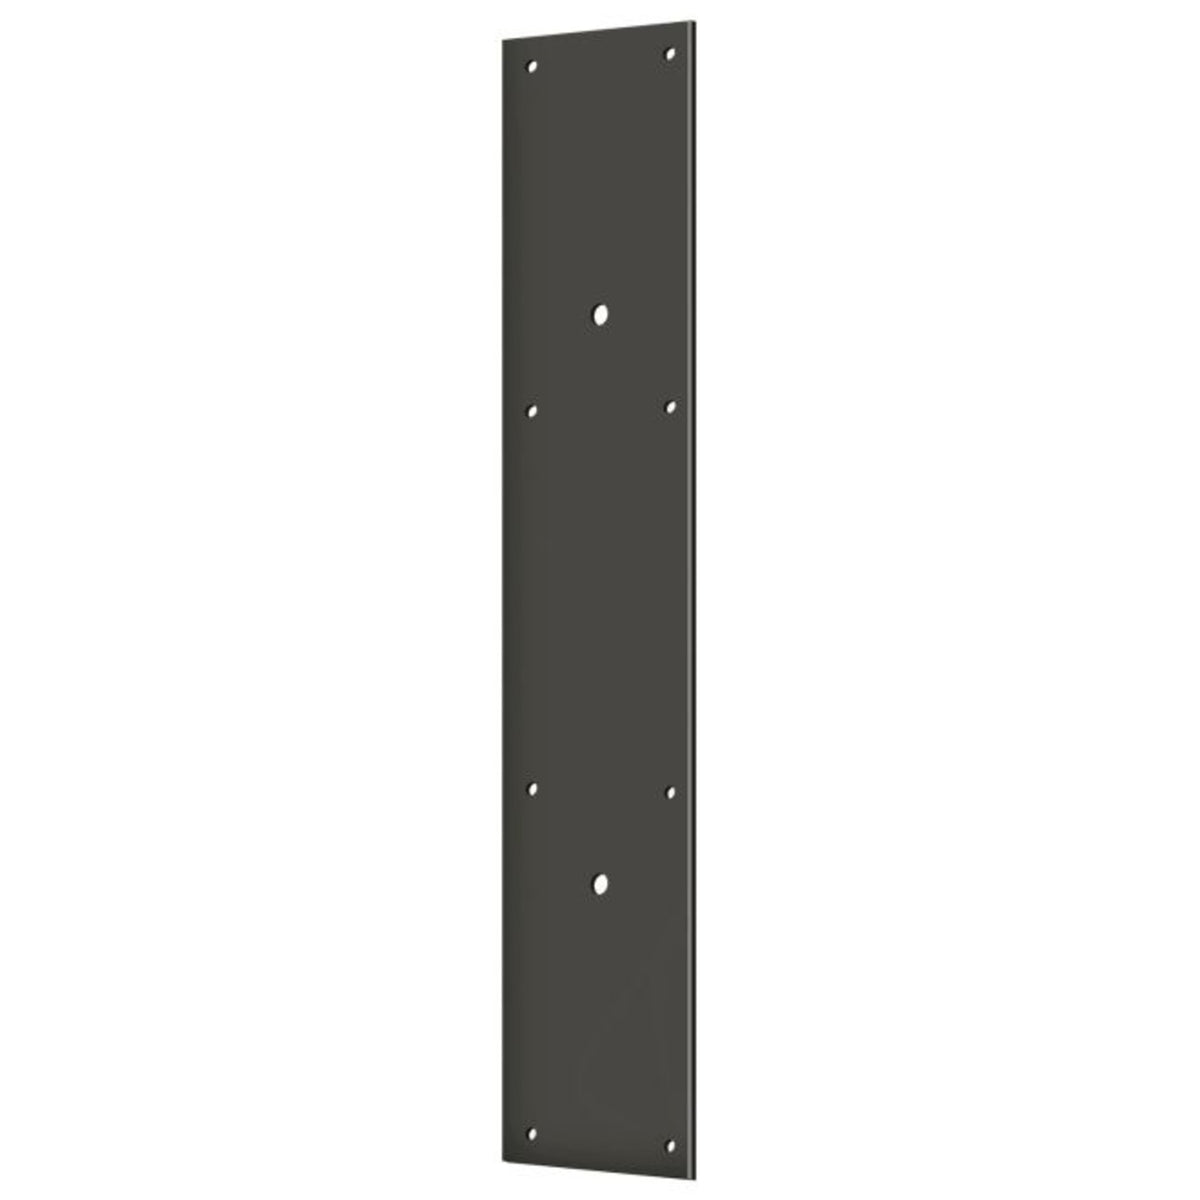 Deltana PPH3520U10B Push Plate For Door Pull, Oil Rubbed Bronze, 20"